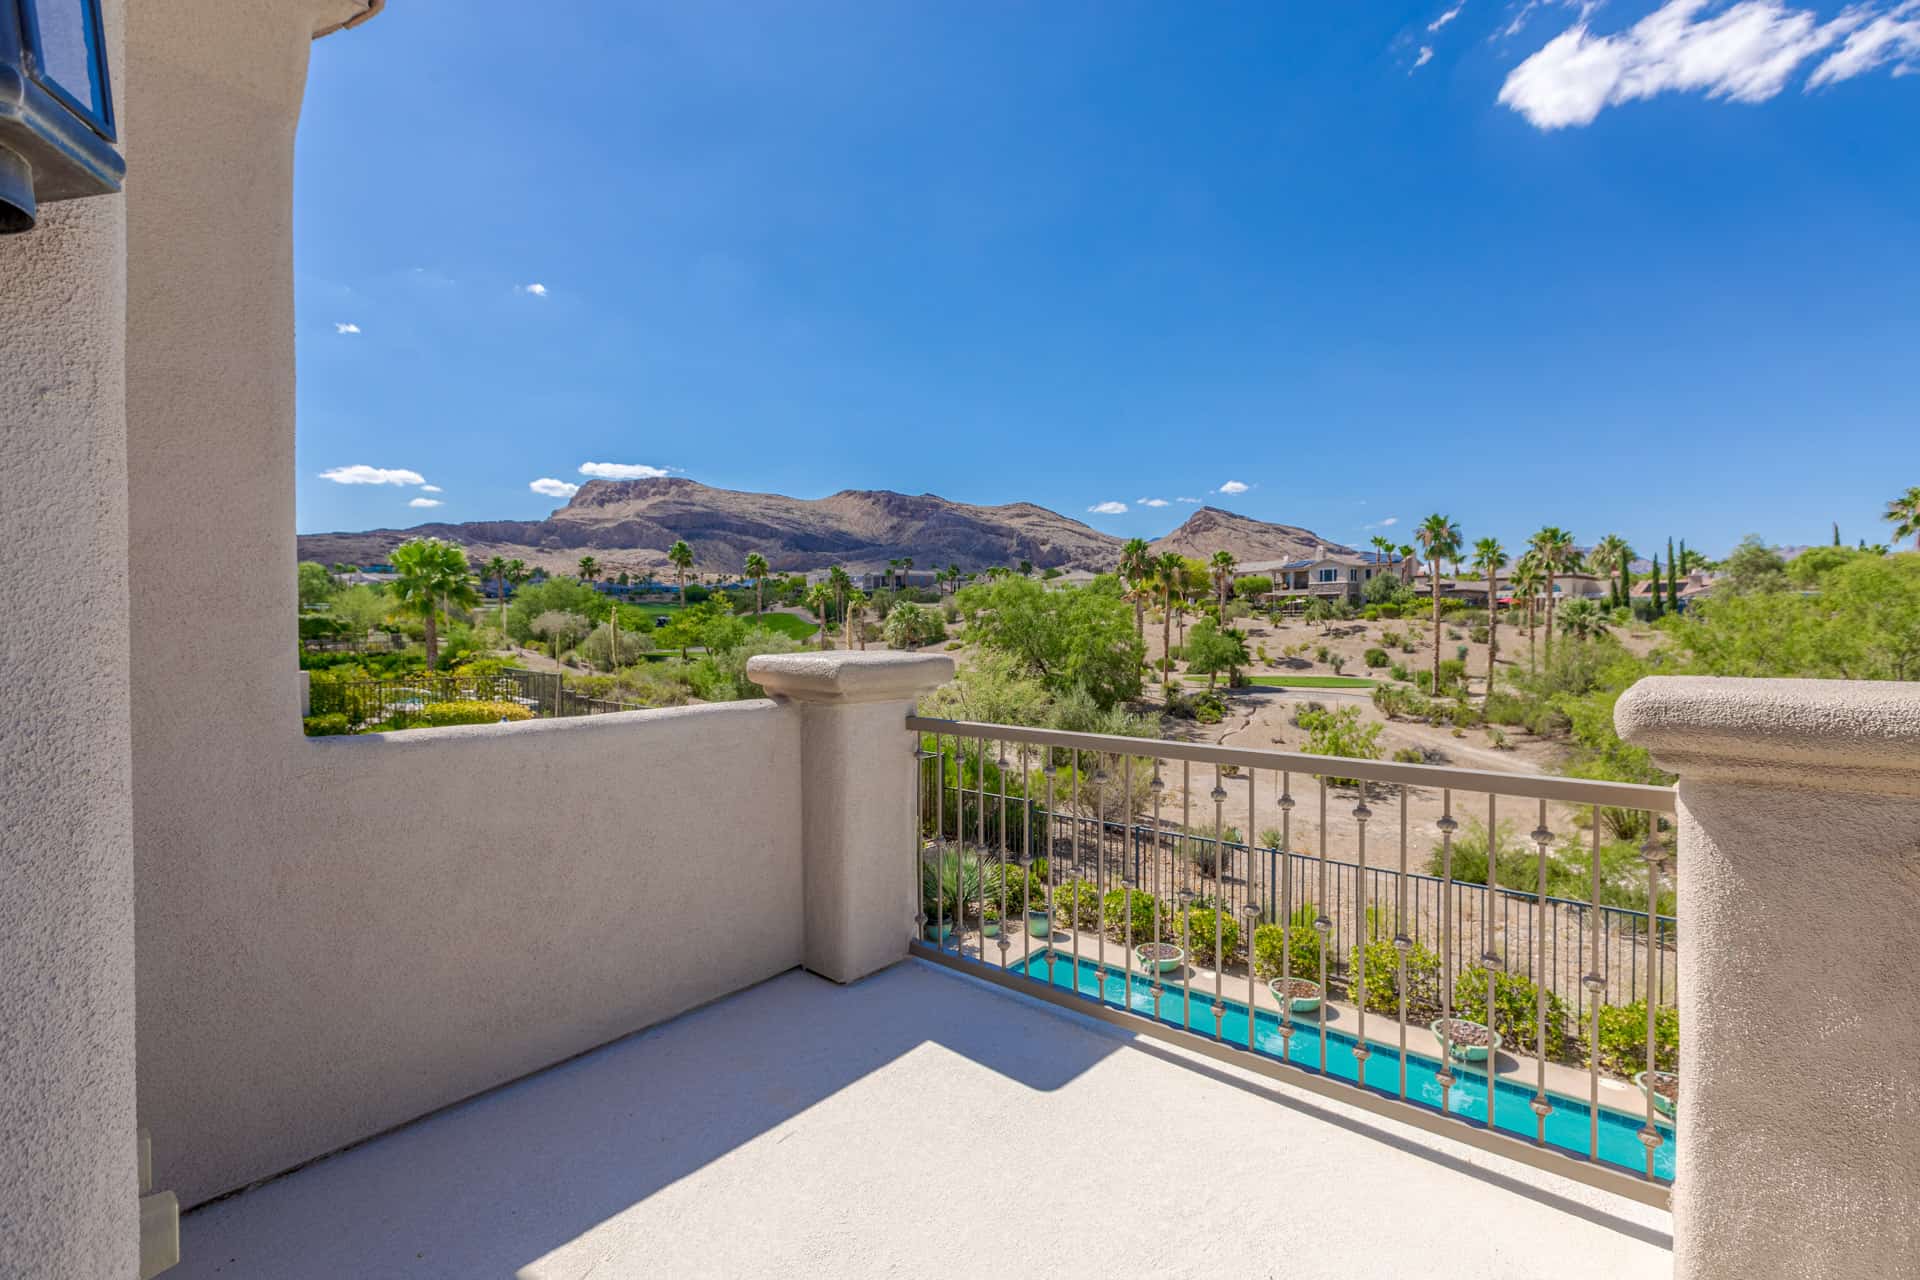 las-vegas-luxry-real-estate-realtor-rob-jensen-company-11434-glowing-sunset-lane-red-rock-country-club54